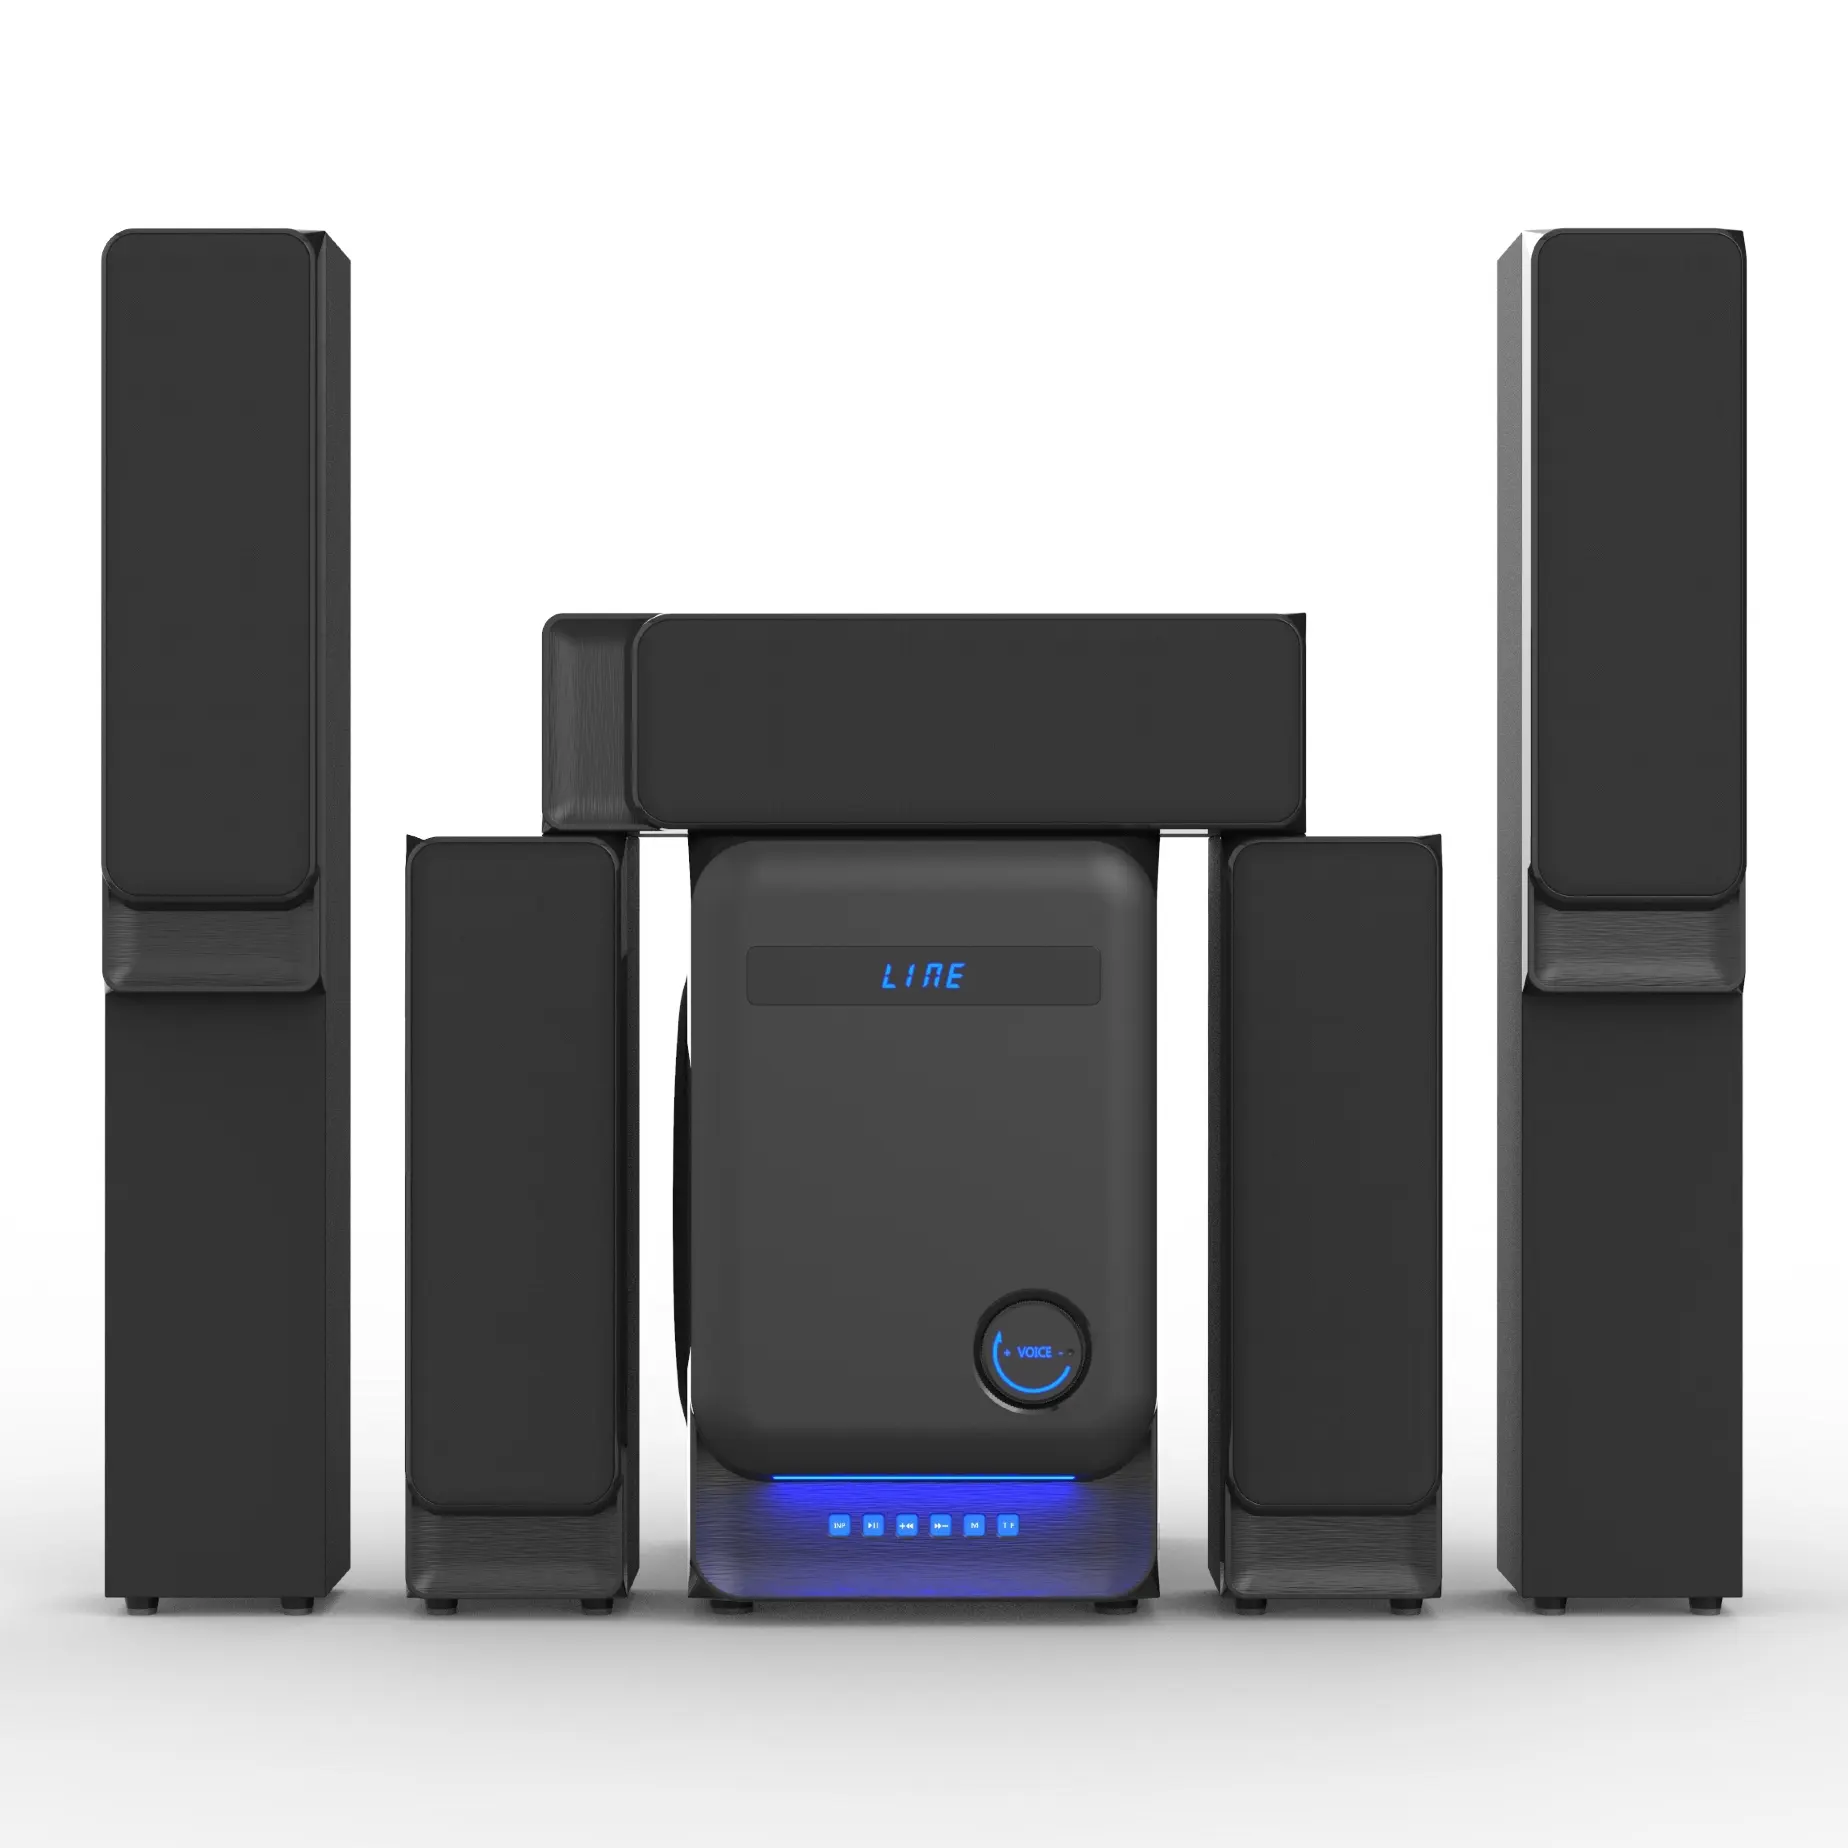 Cheap price 5.1 Home Theatre System/wooden 5.1 Home Theatre Speaker System for Super Bass